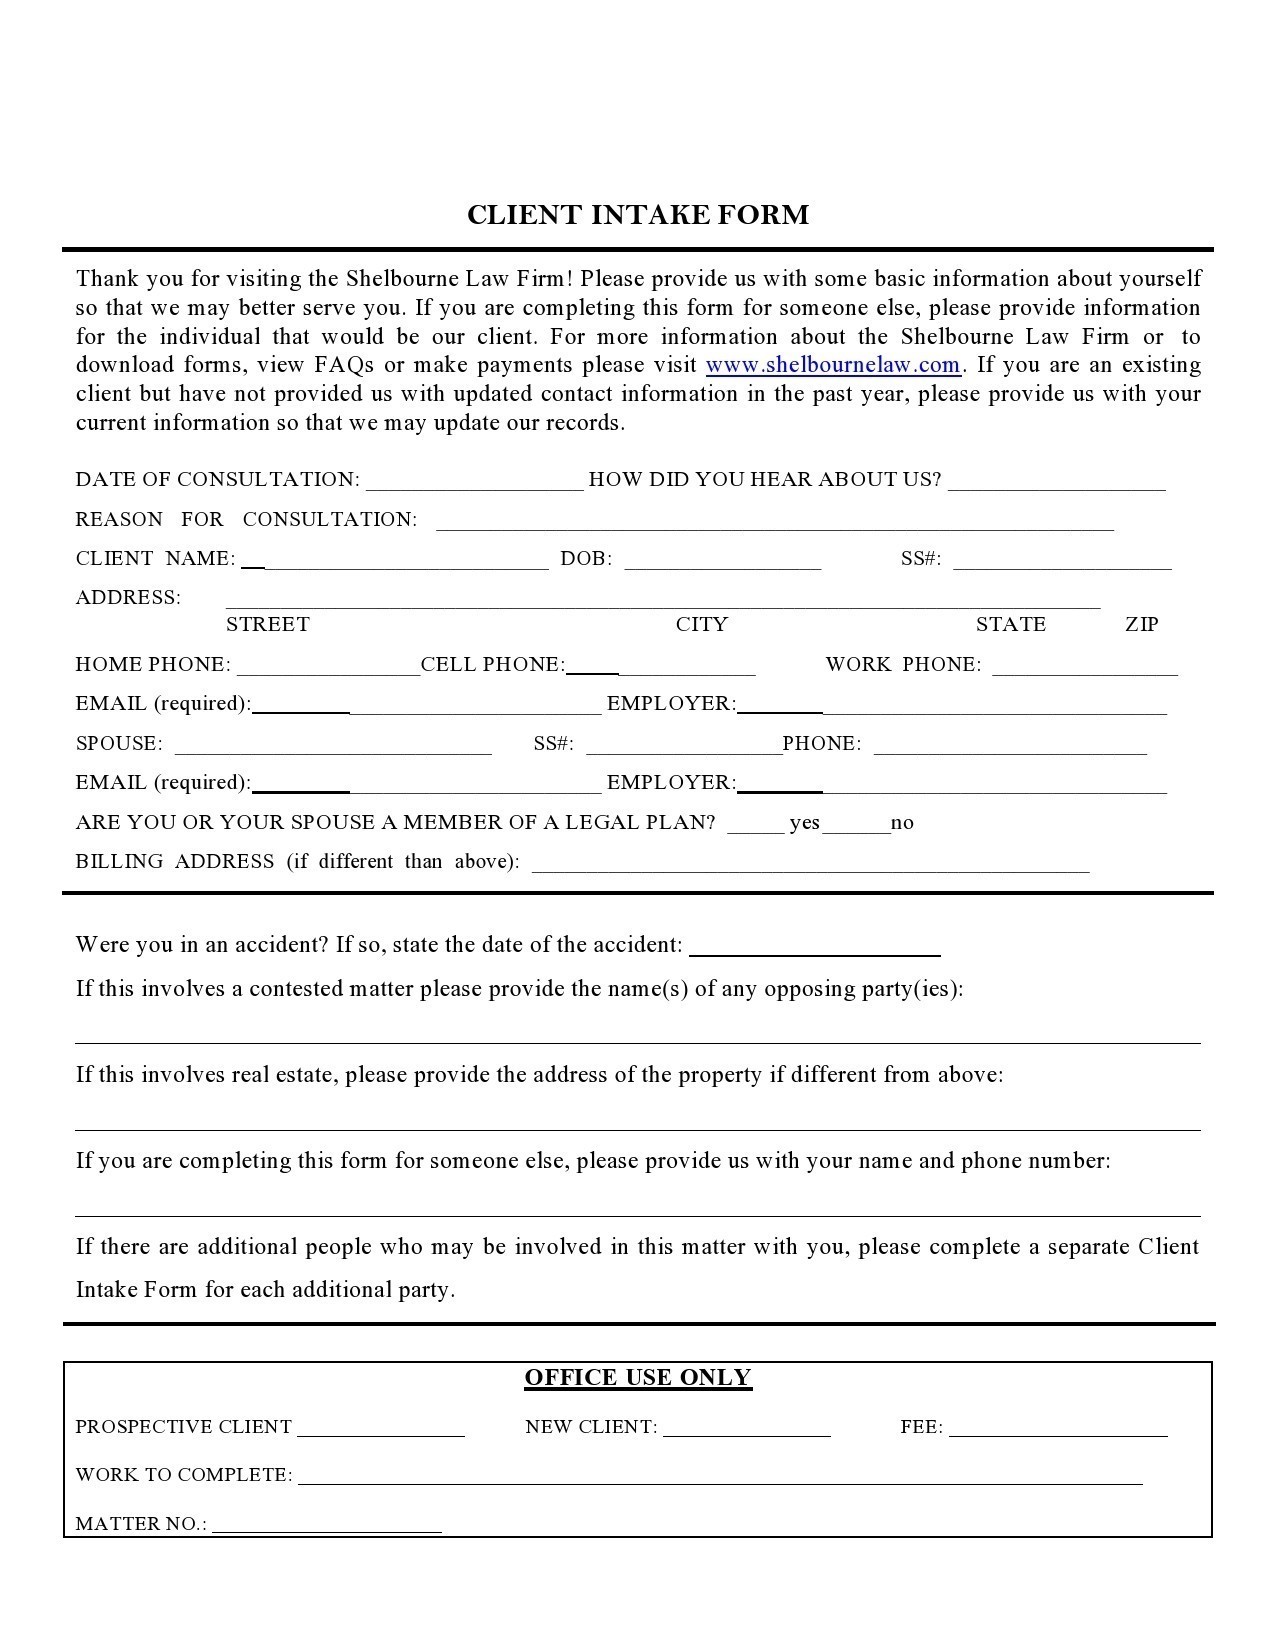 Free client intake form 24